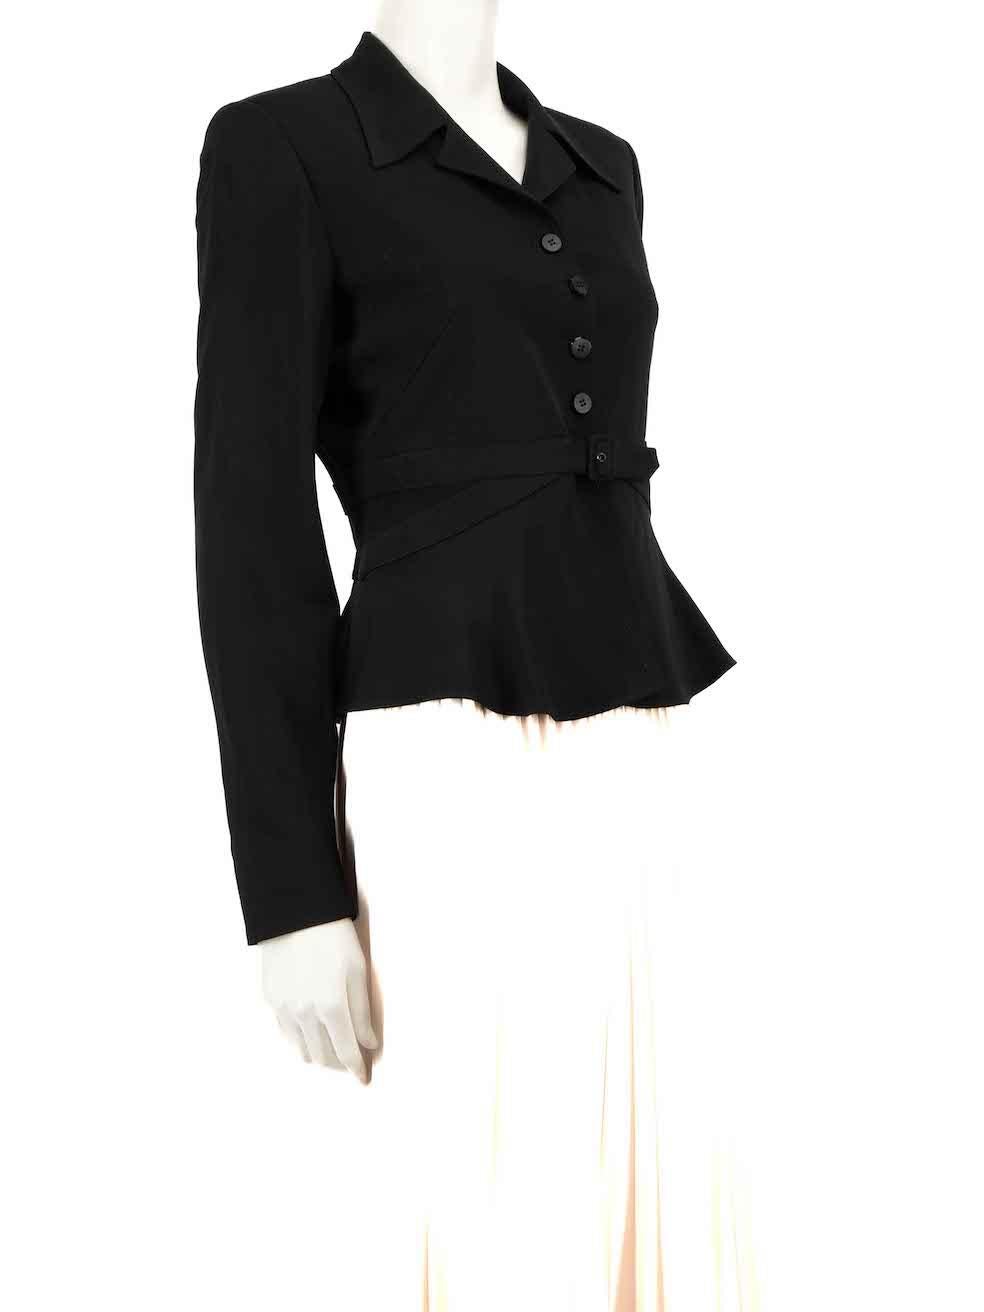 CONDITION is Very good. Hardly any visible wear to blazer is evident on this used Valentino designer resale item.
 
 
 
 Details
 
 
 Vintage
 
 Black
 
 Synthetic
 
 Blazer
 
 Belted
 
 Single breasted
 
 Button up fastening
 
 Shoulder pads
 
